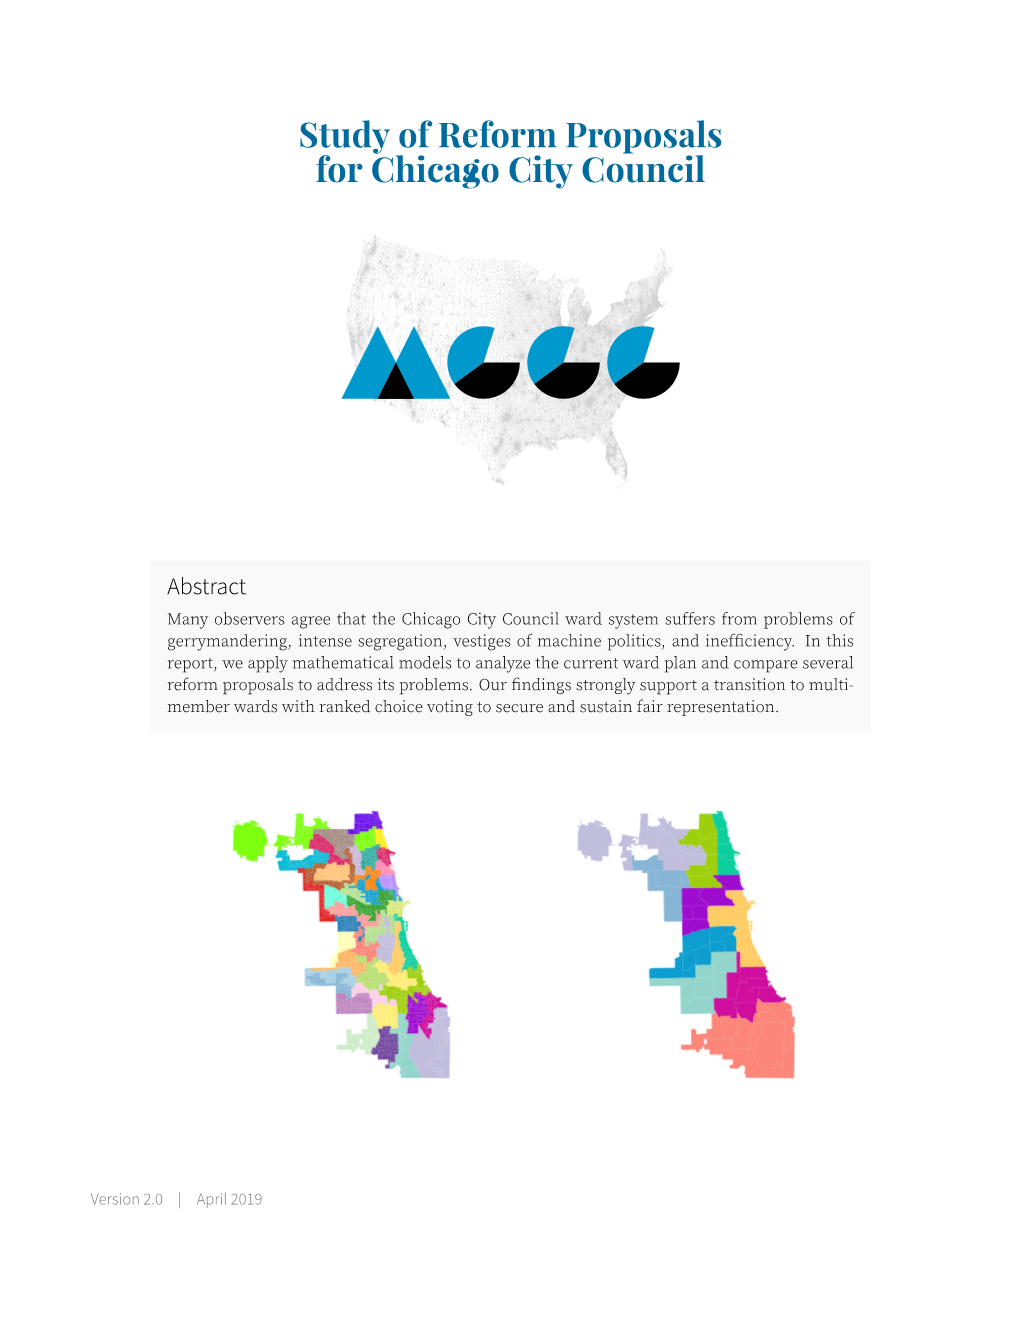 Study of Reform Proposals for Chicago City Council